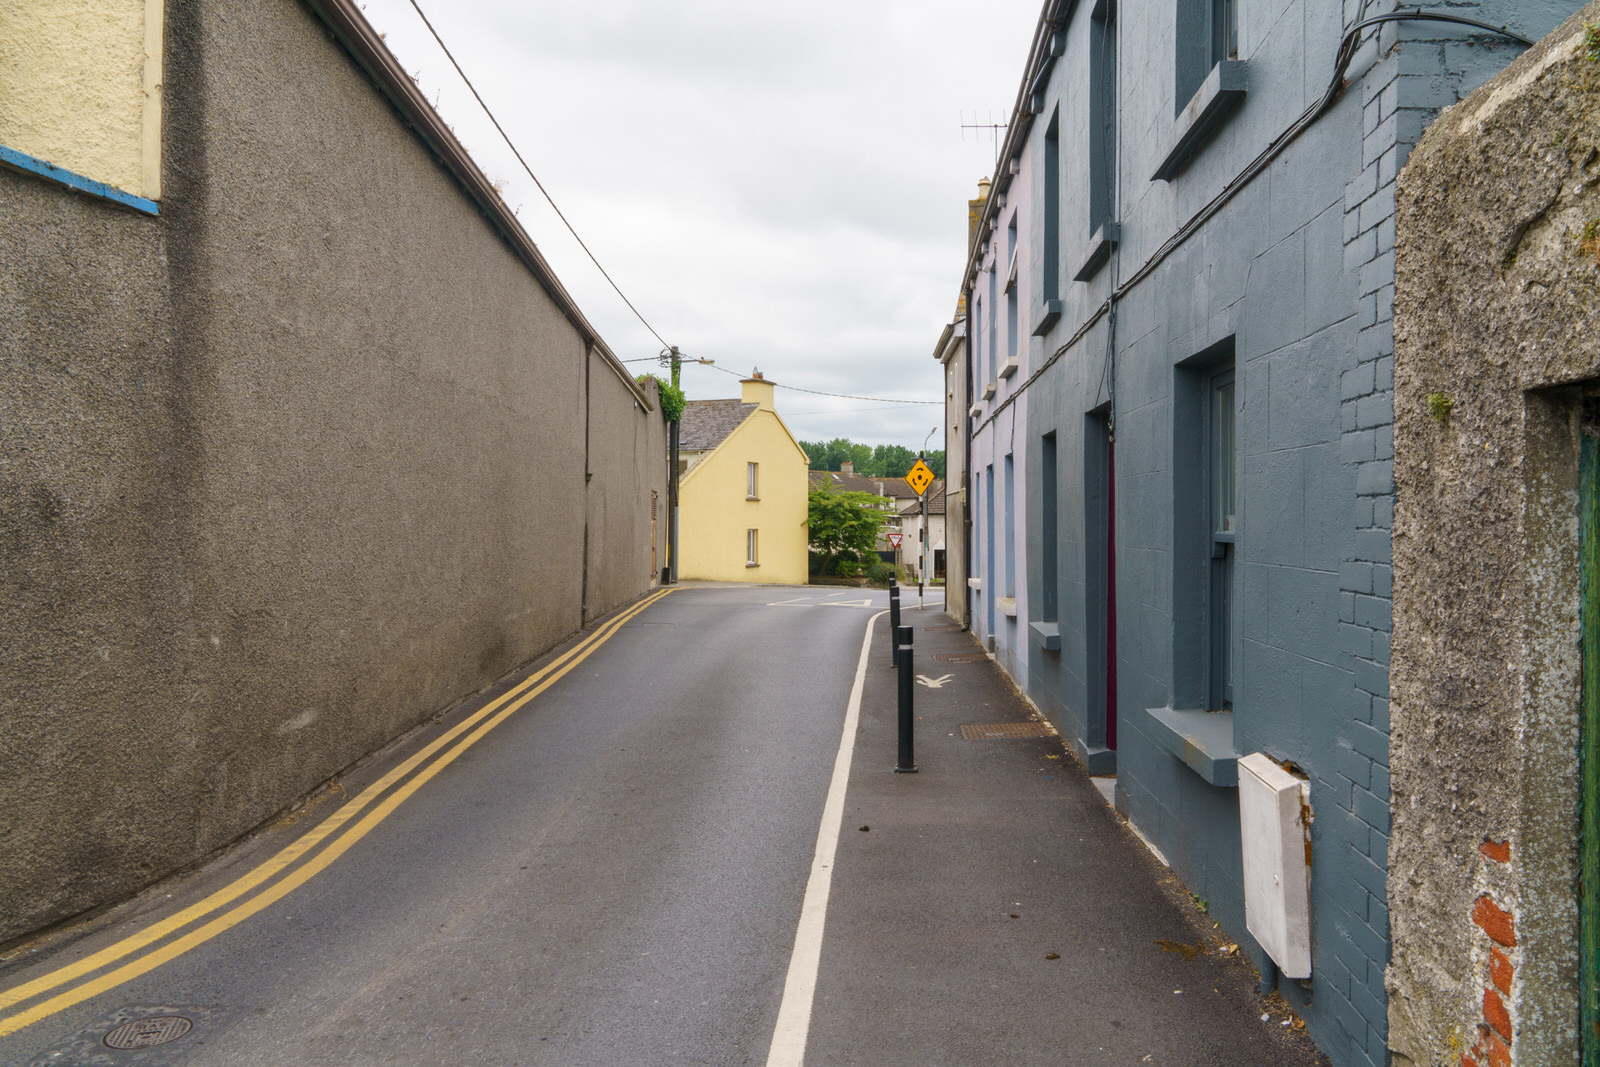 IN 2018 I EXPLORED A NARROW LANE NETWORK IN KILKENNY [DEAN STREET TO BUTT'S GREEN]-234287-1